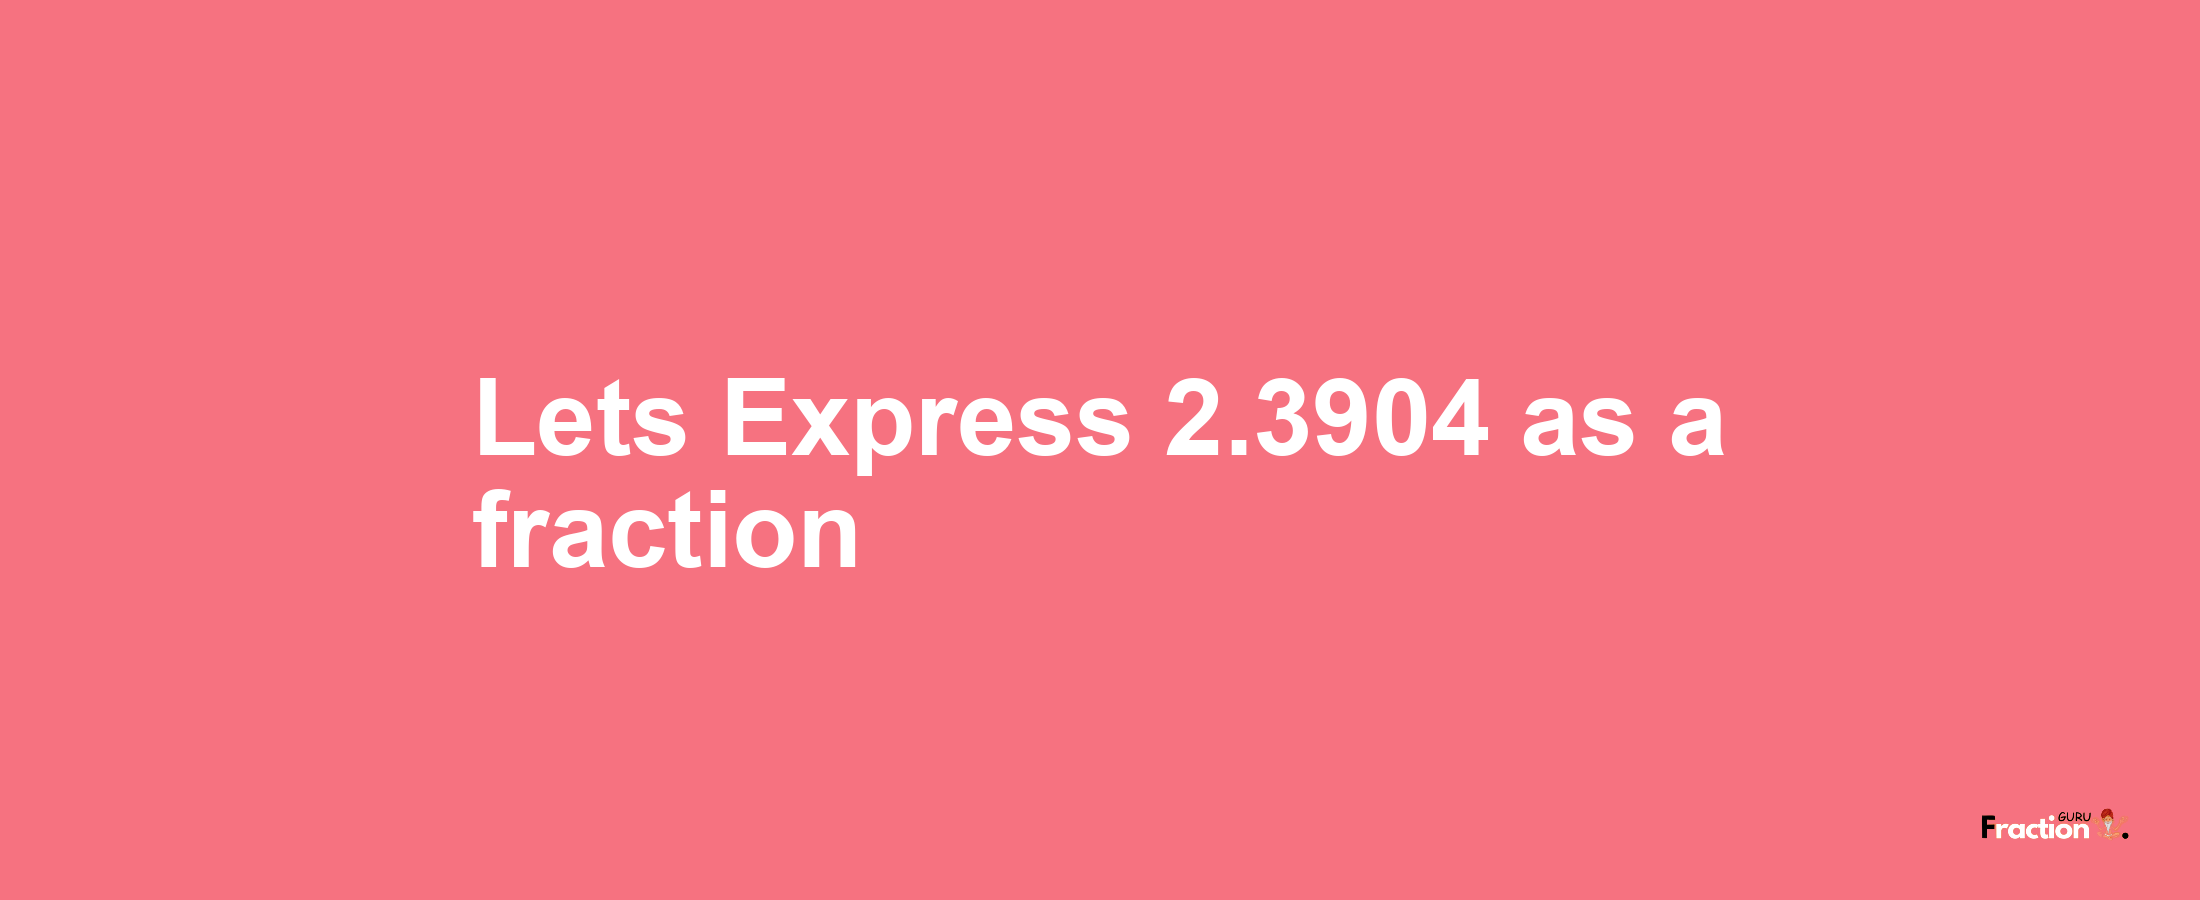 Lets Express 2.3904 as afraction